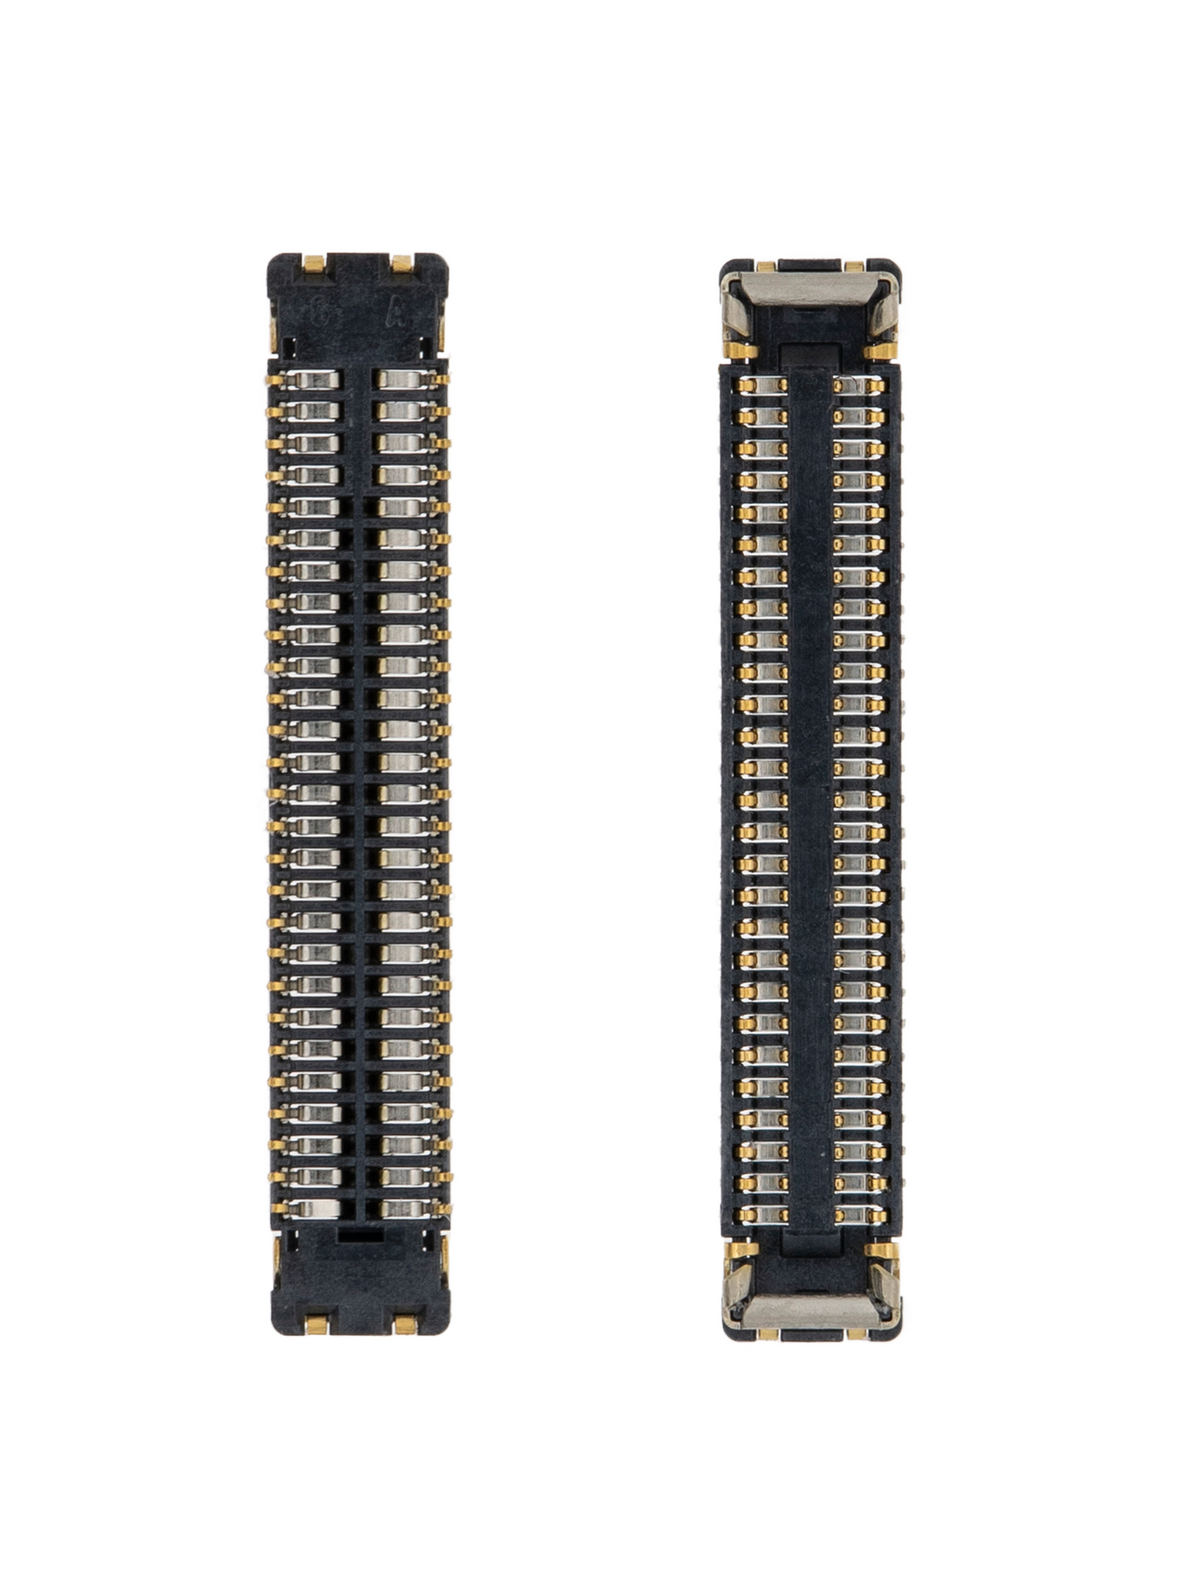 FPC (LCD) CONNECTOR (ON MOTHERBOARD) (54 PIN) FOR IPAD PRO 9.7"